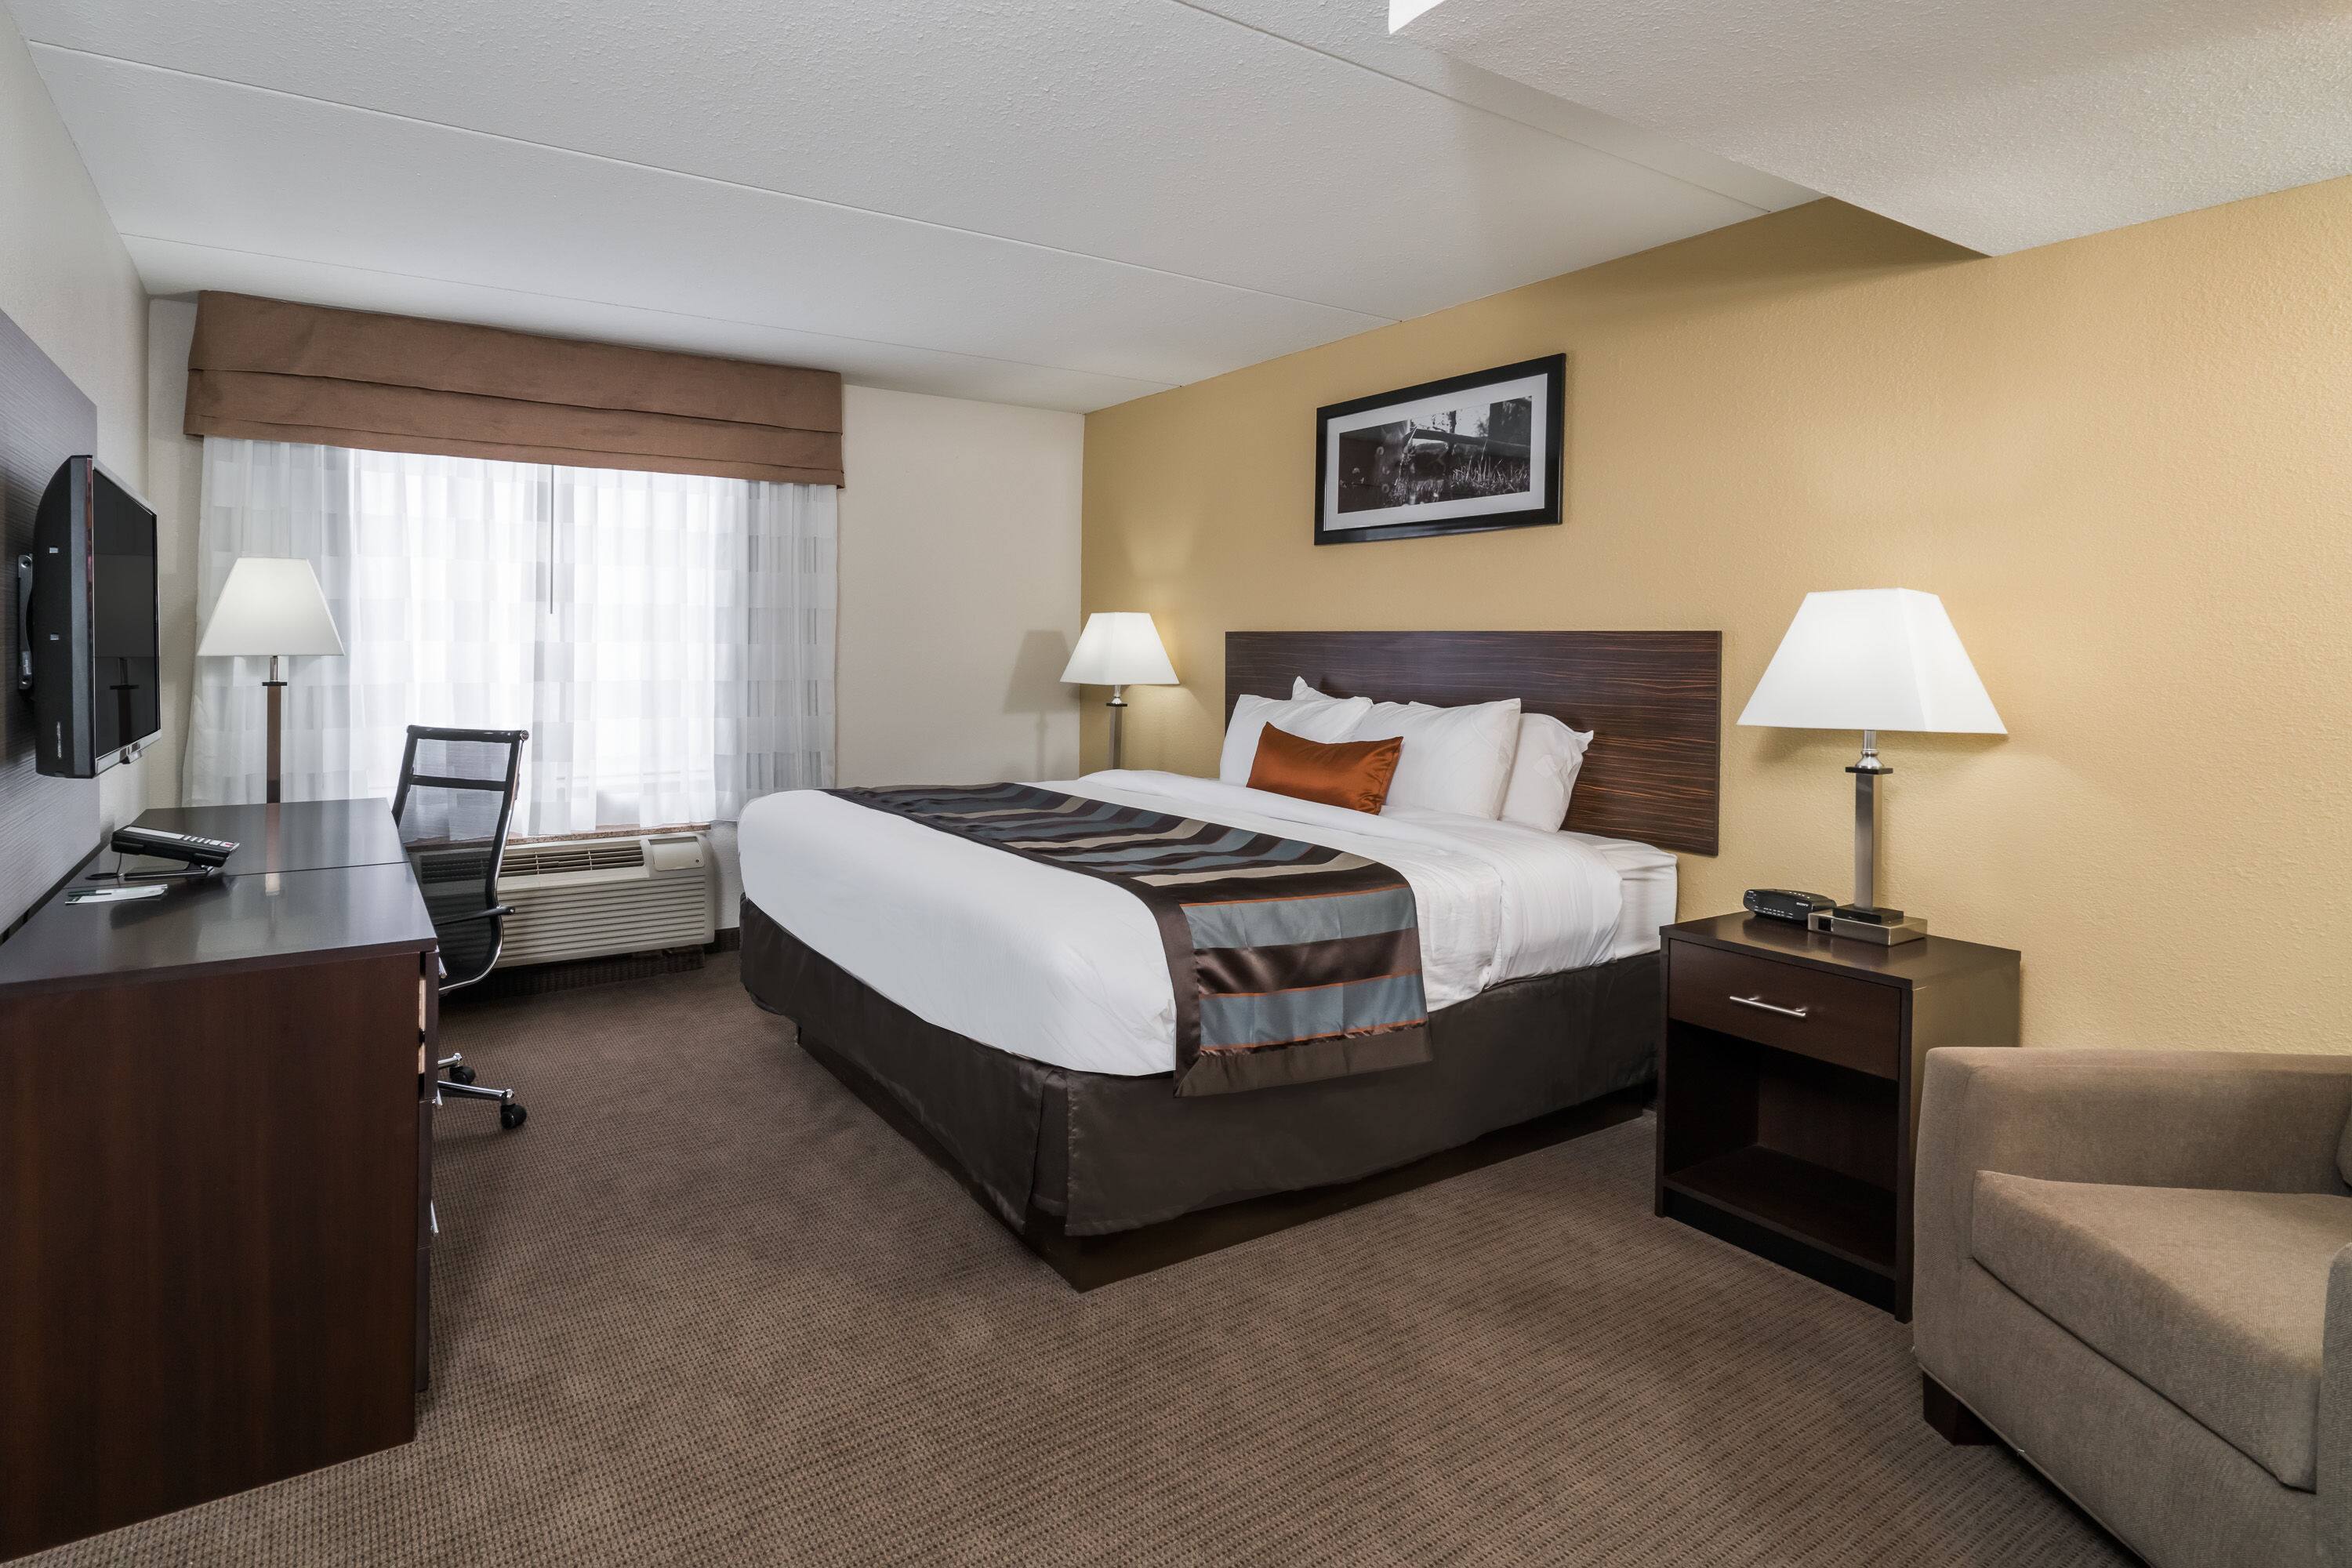 Discount [75% Off] Wingate By Wyndham Bowling Green United States - Hotel Near Me | Hotel ...